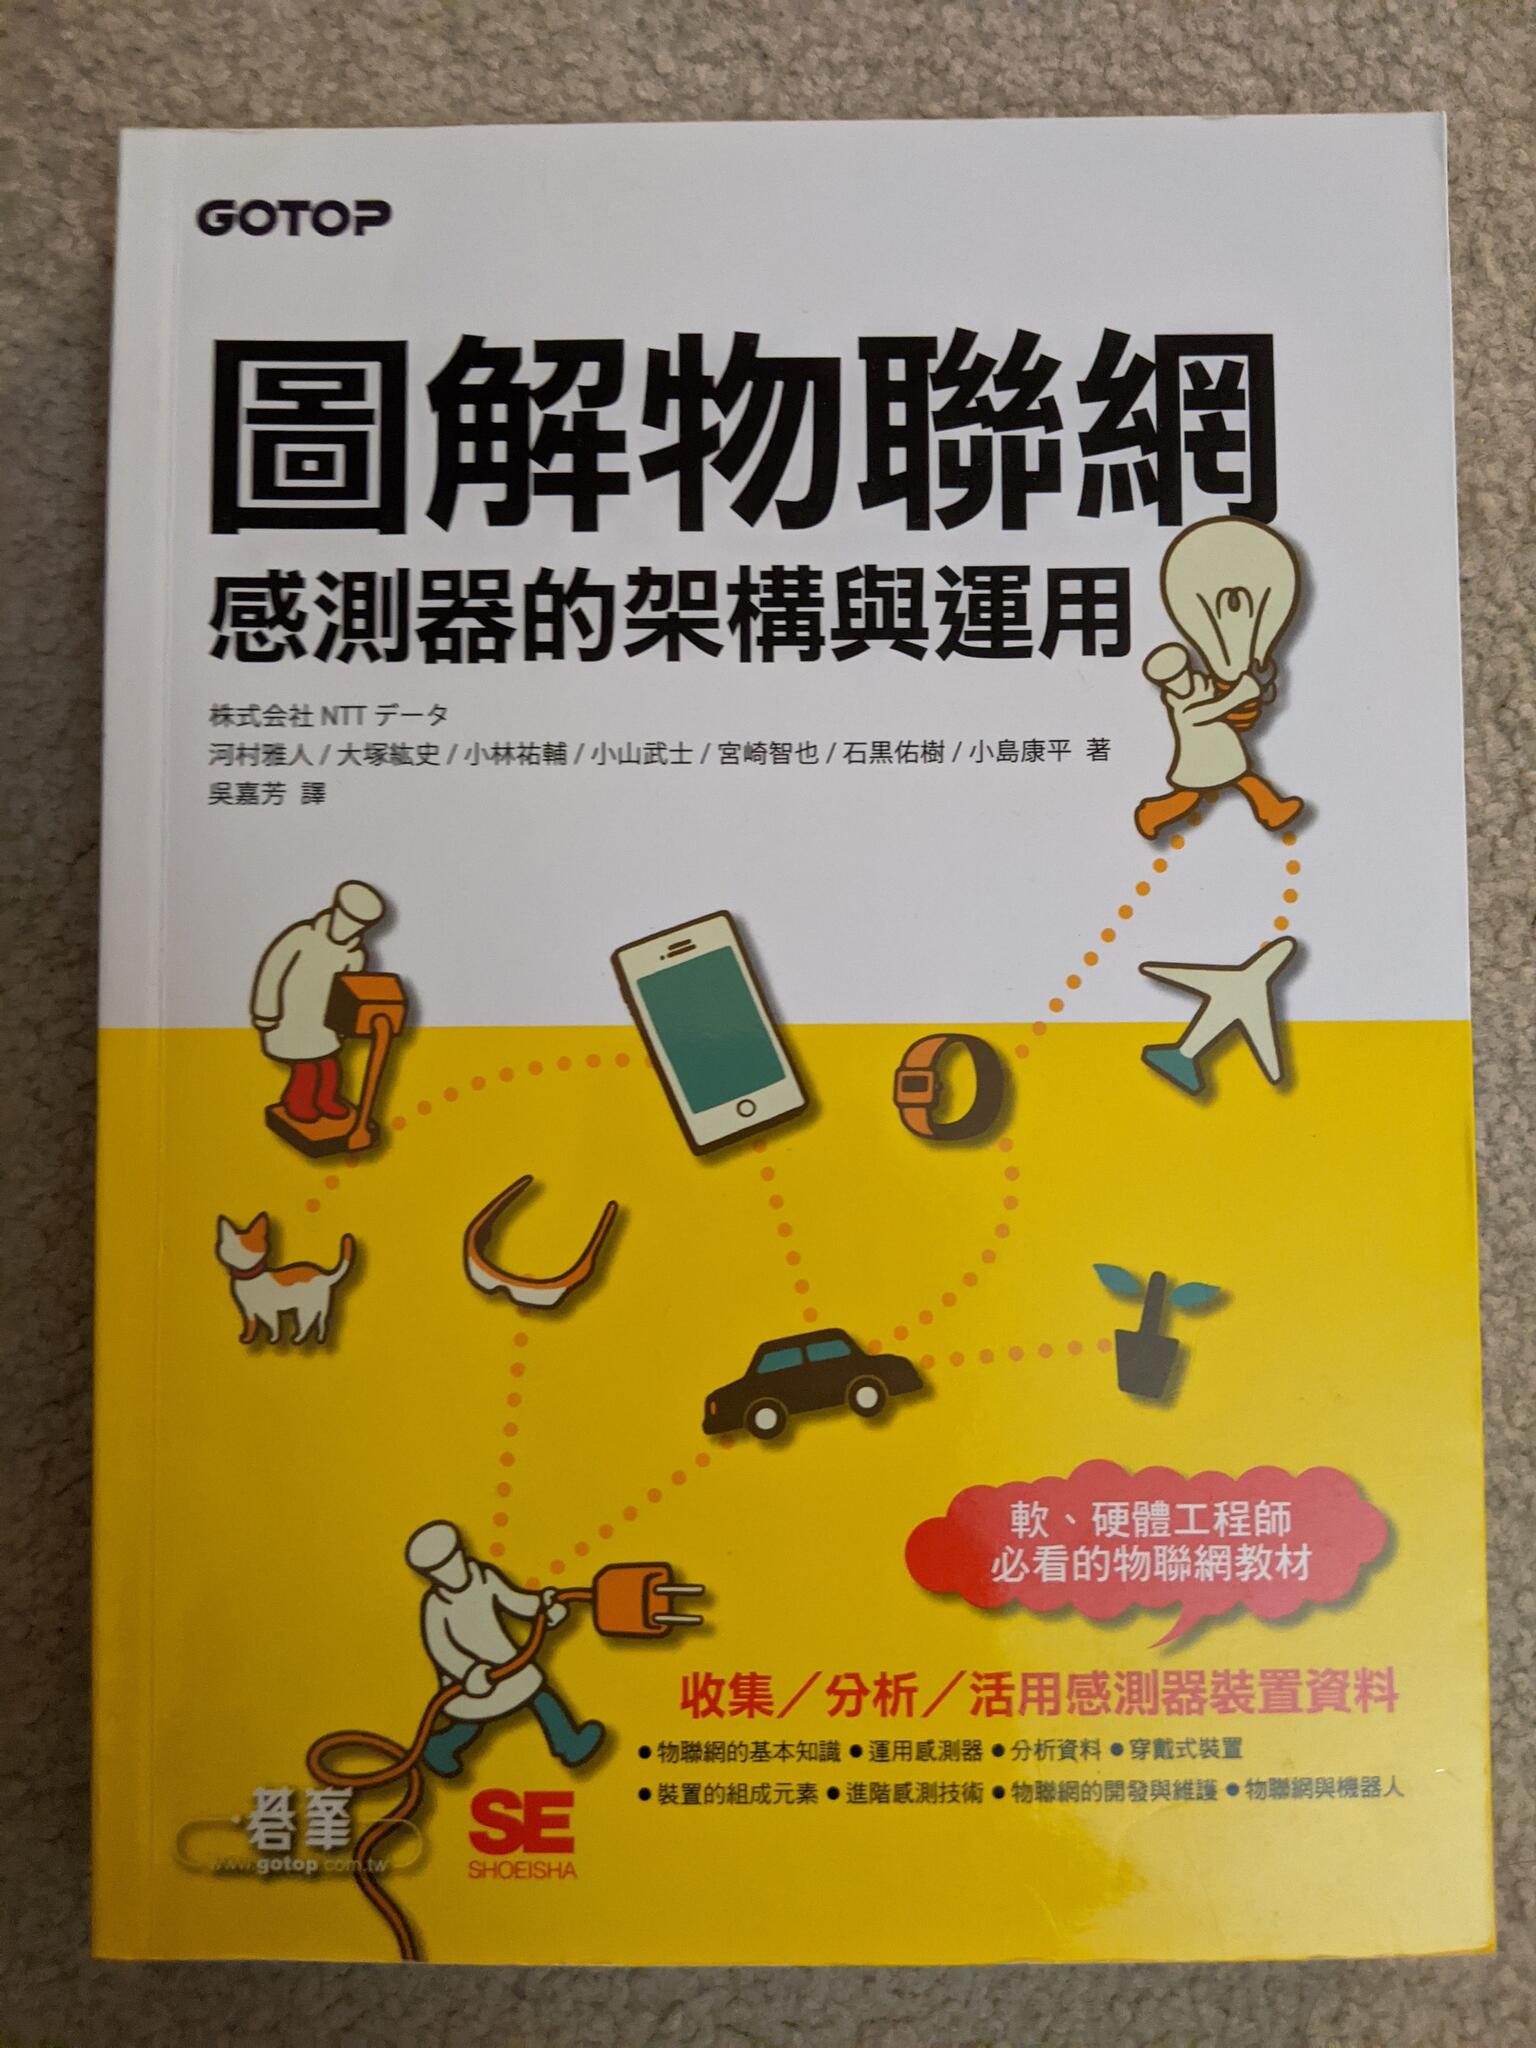 Book 圖解物聯網for Free In Mountain View Ca Finds Nextdoor